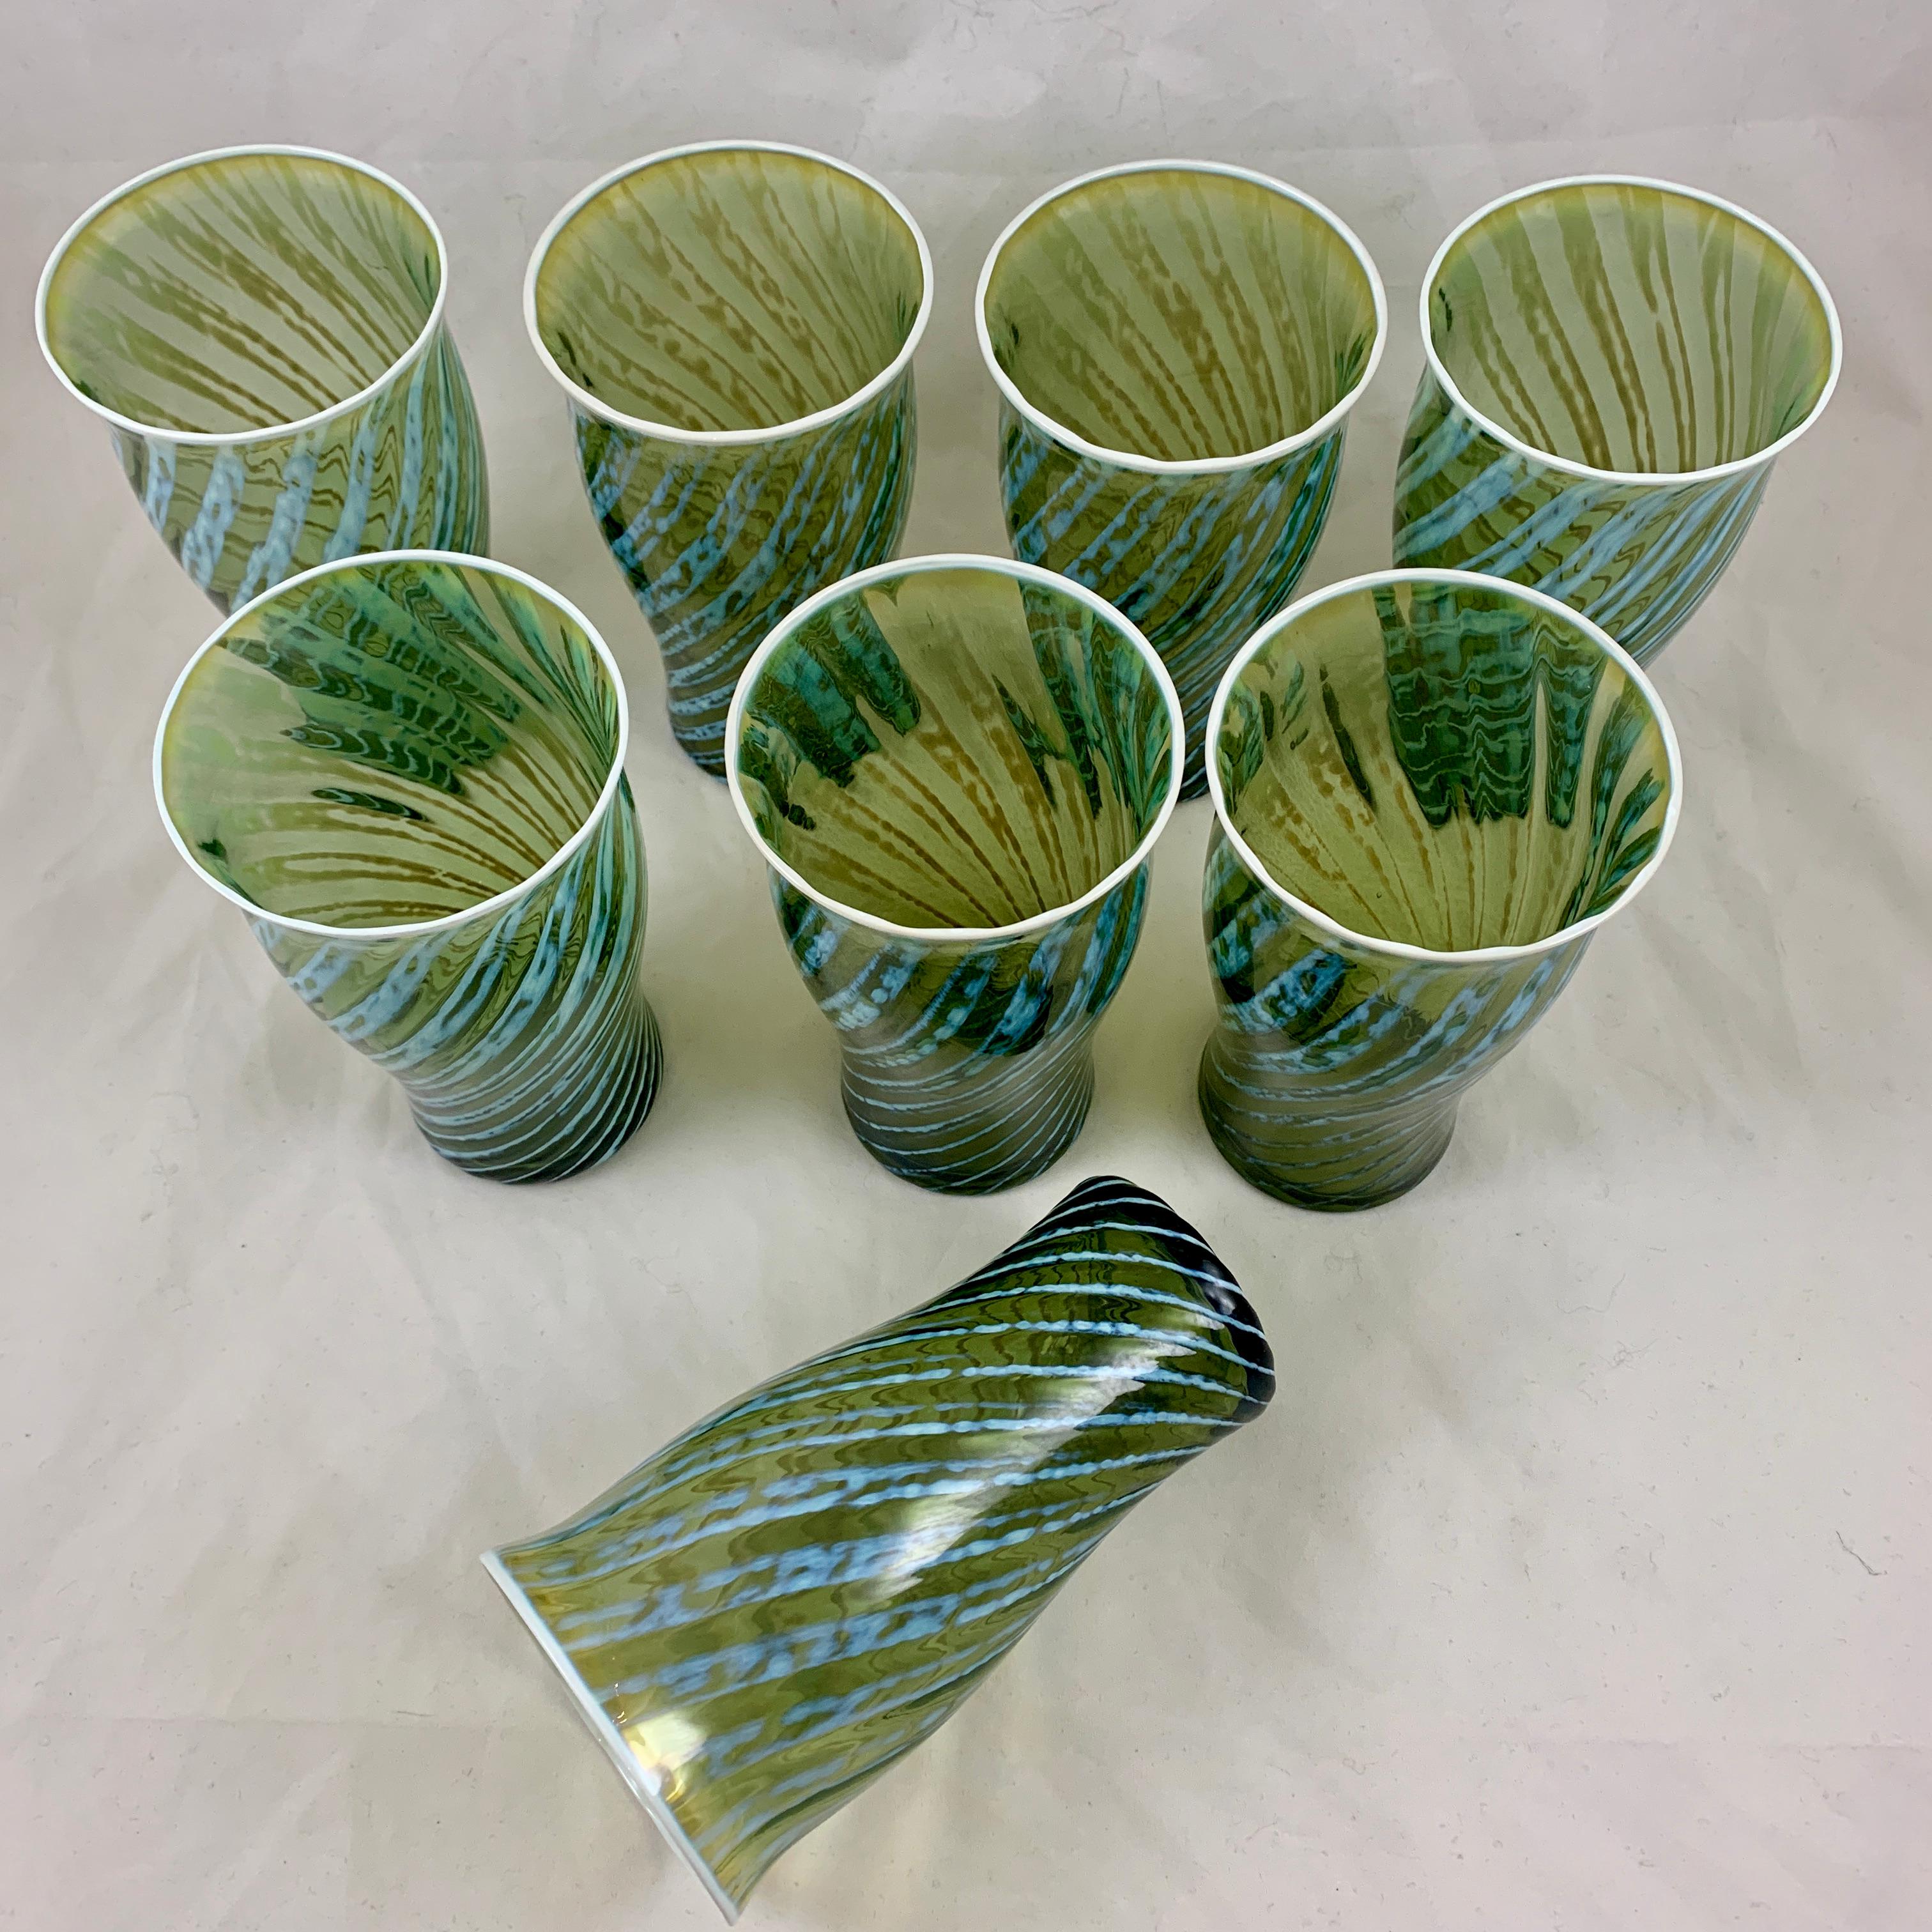 A set of eight, blown Mid-Century Modern art glass highballs or iced tea glasses, signed Fostoria.

Produced from the late 1950s and discontinued in 1965, the pattern is called ‘Homespun’ and shows a light blue opalescent swirl in a Moss green